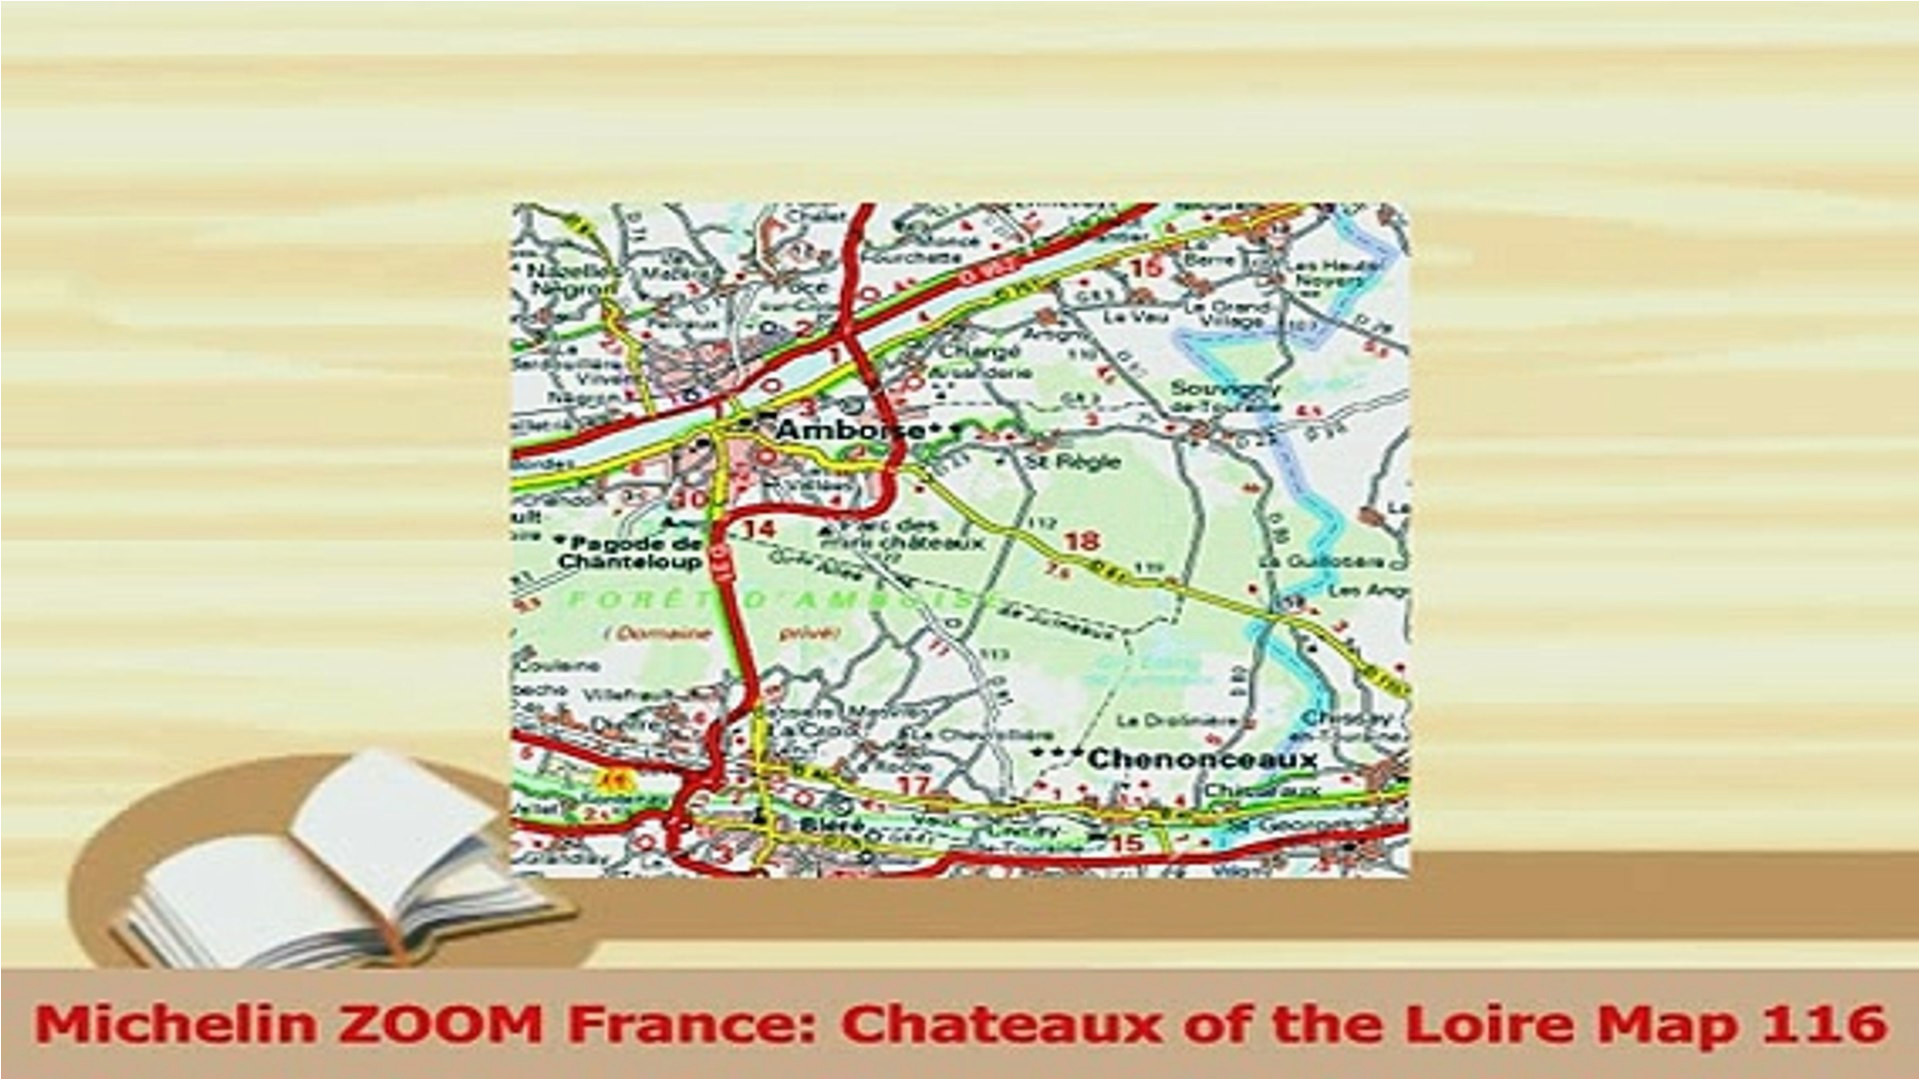 pdf michelin zoom france chateaux of the loire map 116 read online